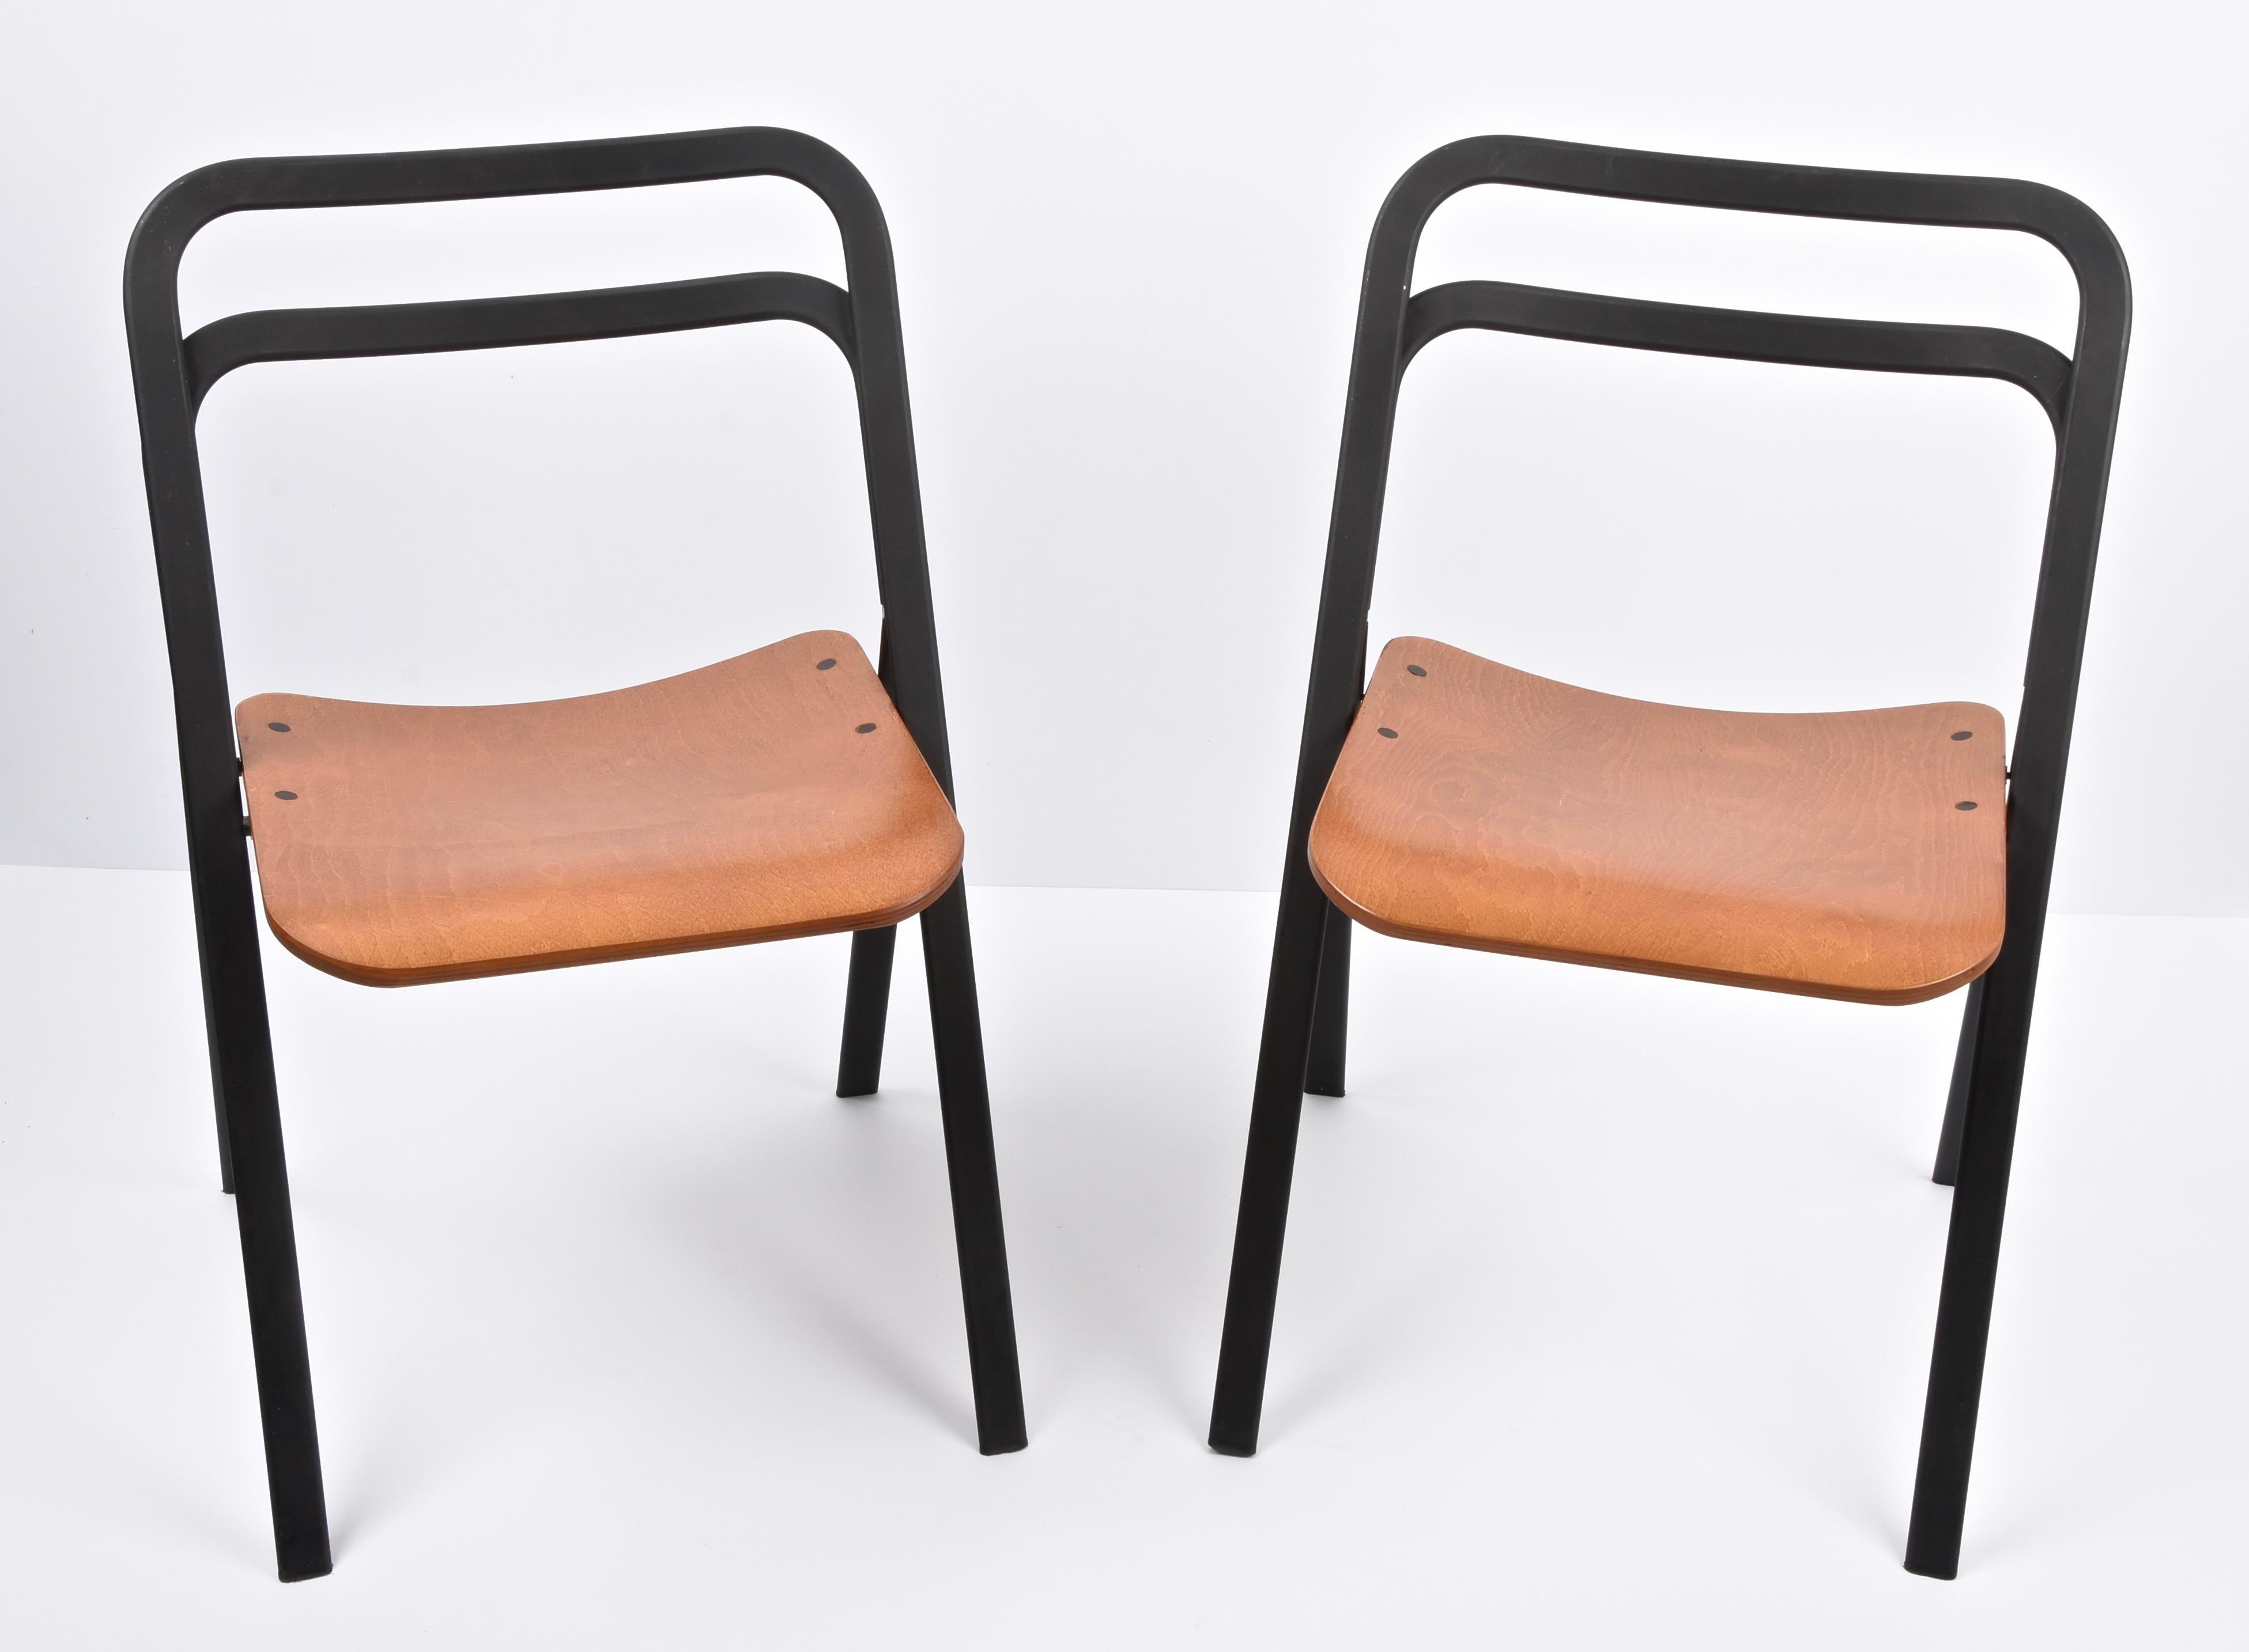 Amazing pair of midcentury black metal and bentwood folding chairs. This fantastic set was designed by Giorgio Catellan and produced by Cidue in Italy during the 1970s.

These chairs are a beautiful example of modelled design, very elegant in